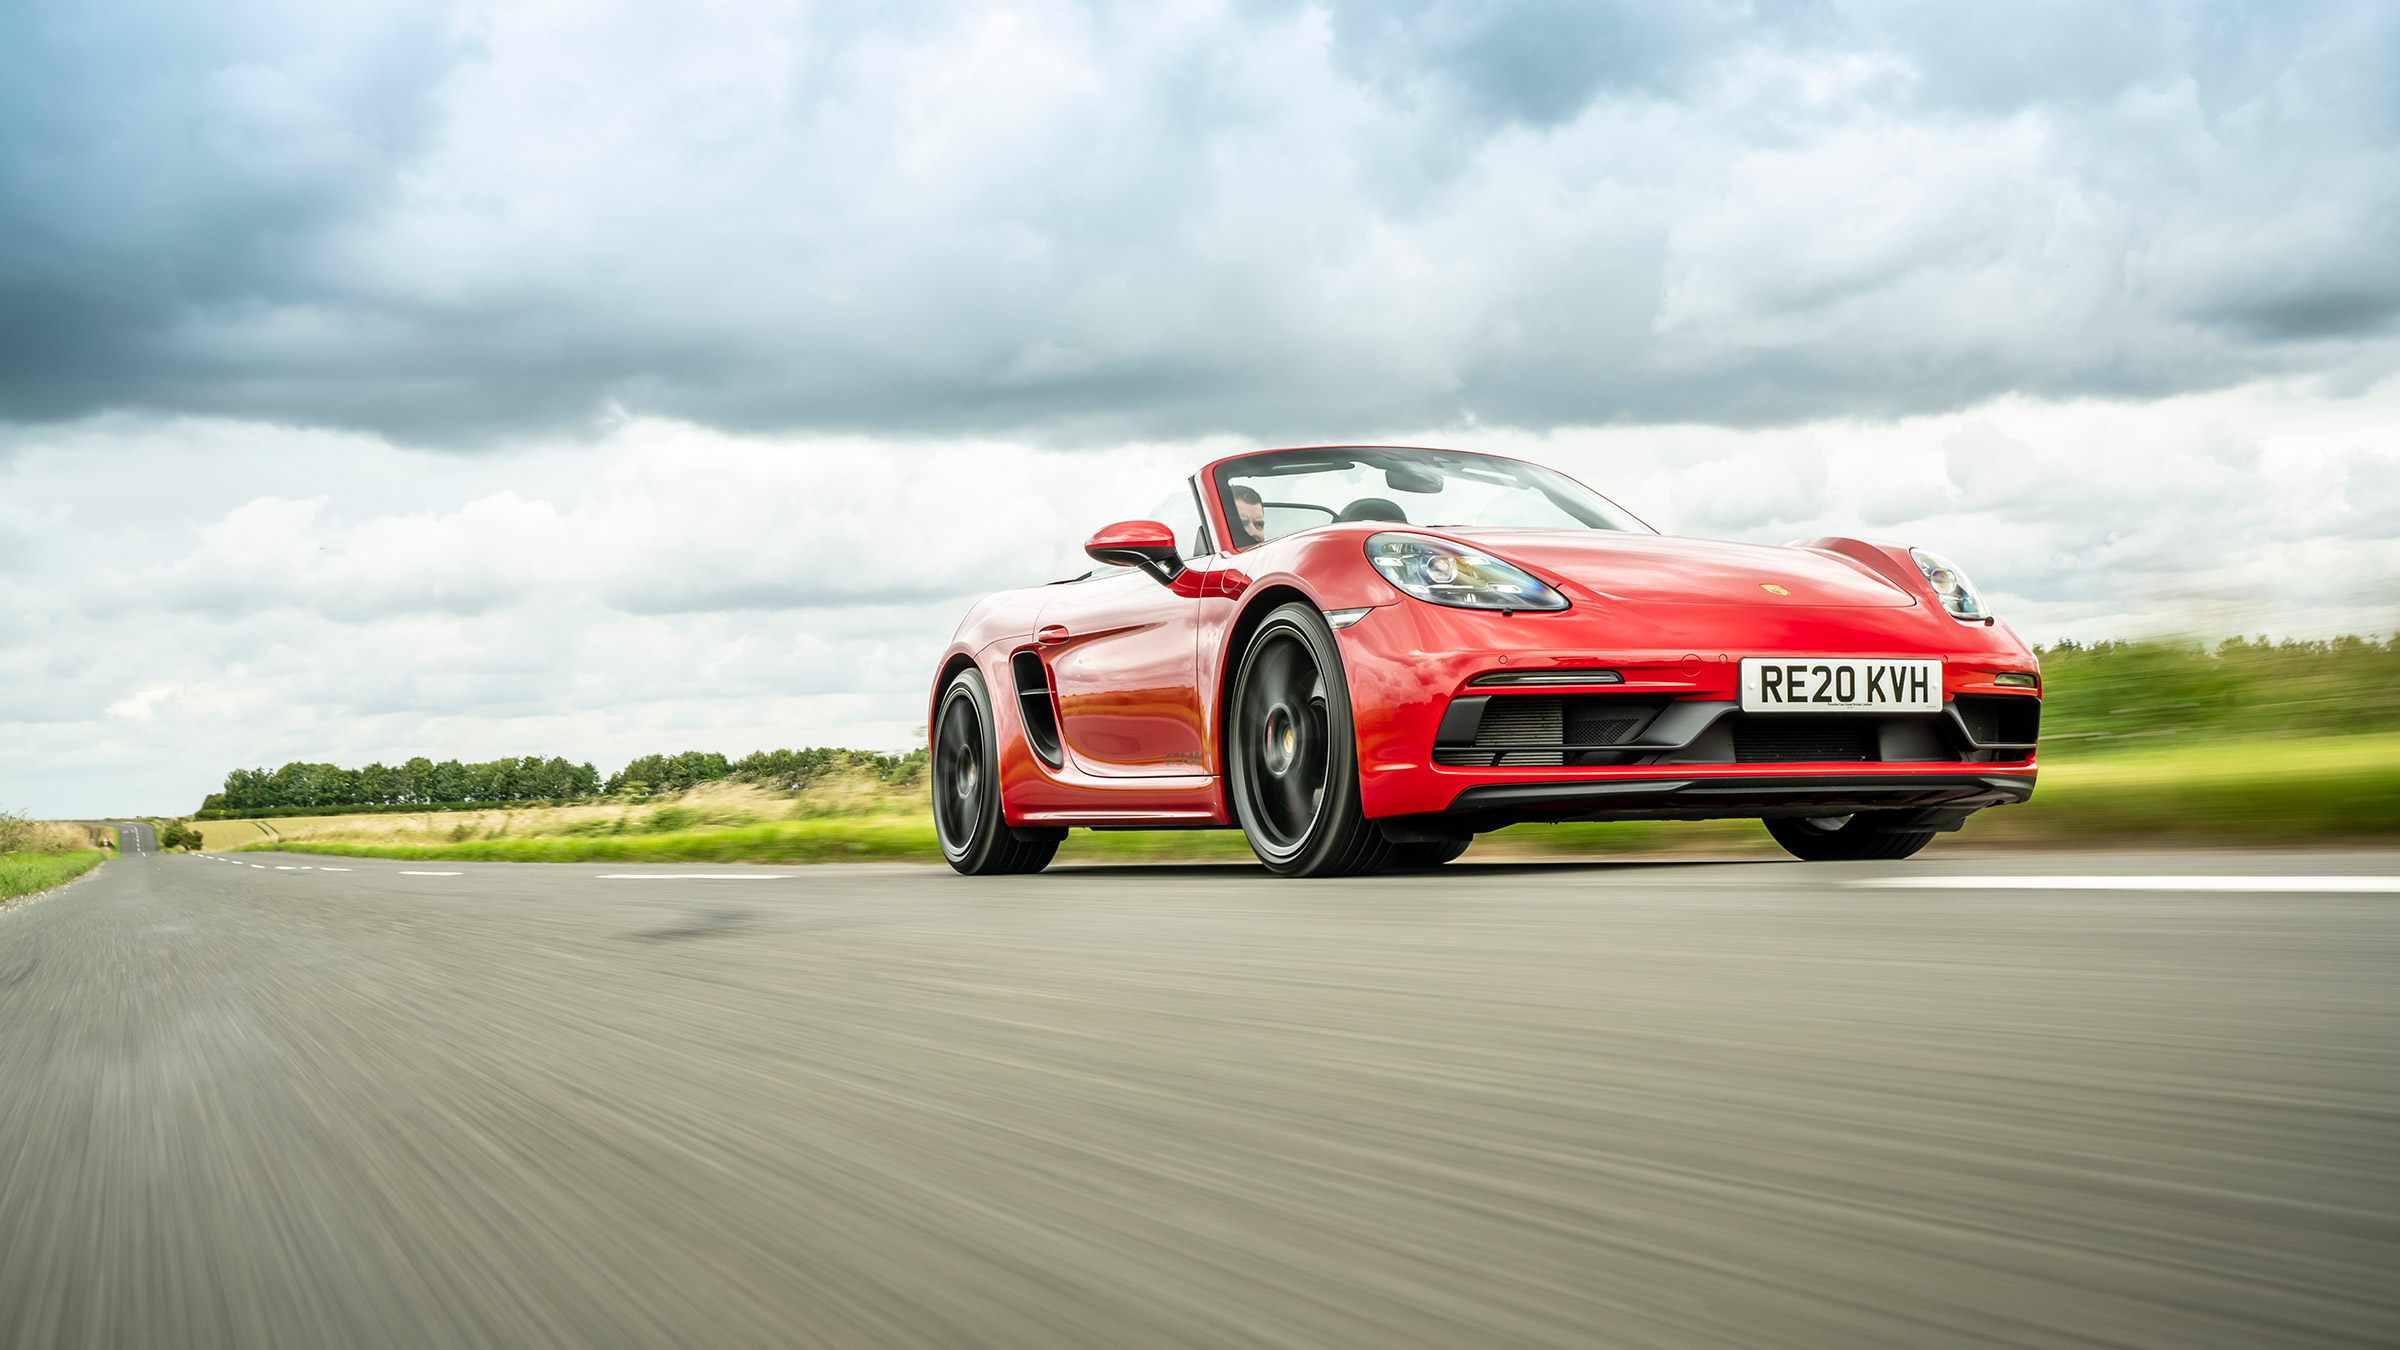 Porsche Boxster Gts 4 0 Pdk 21 Review It S All About The Ratios Evo